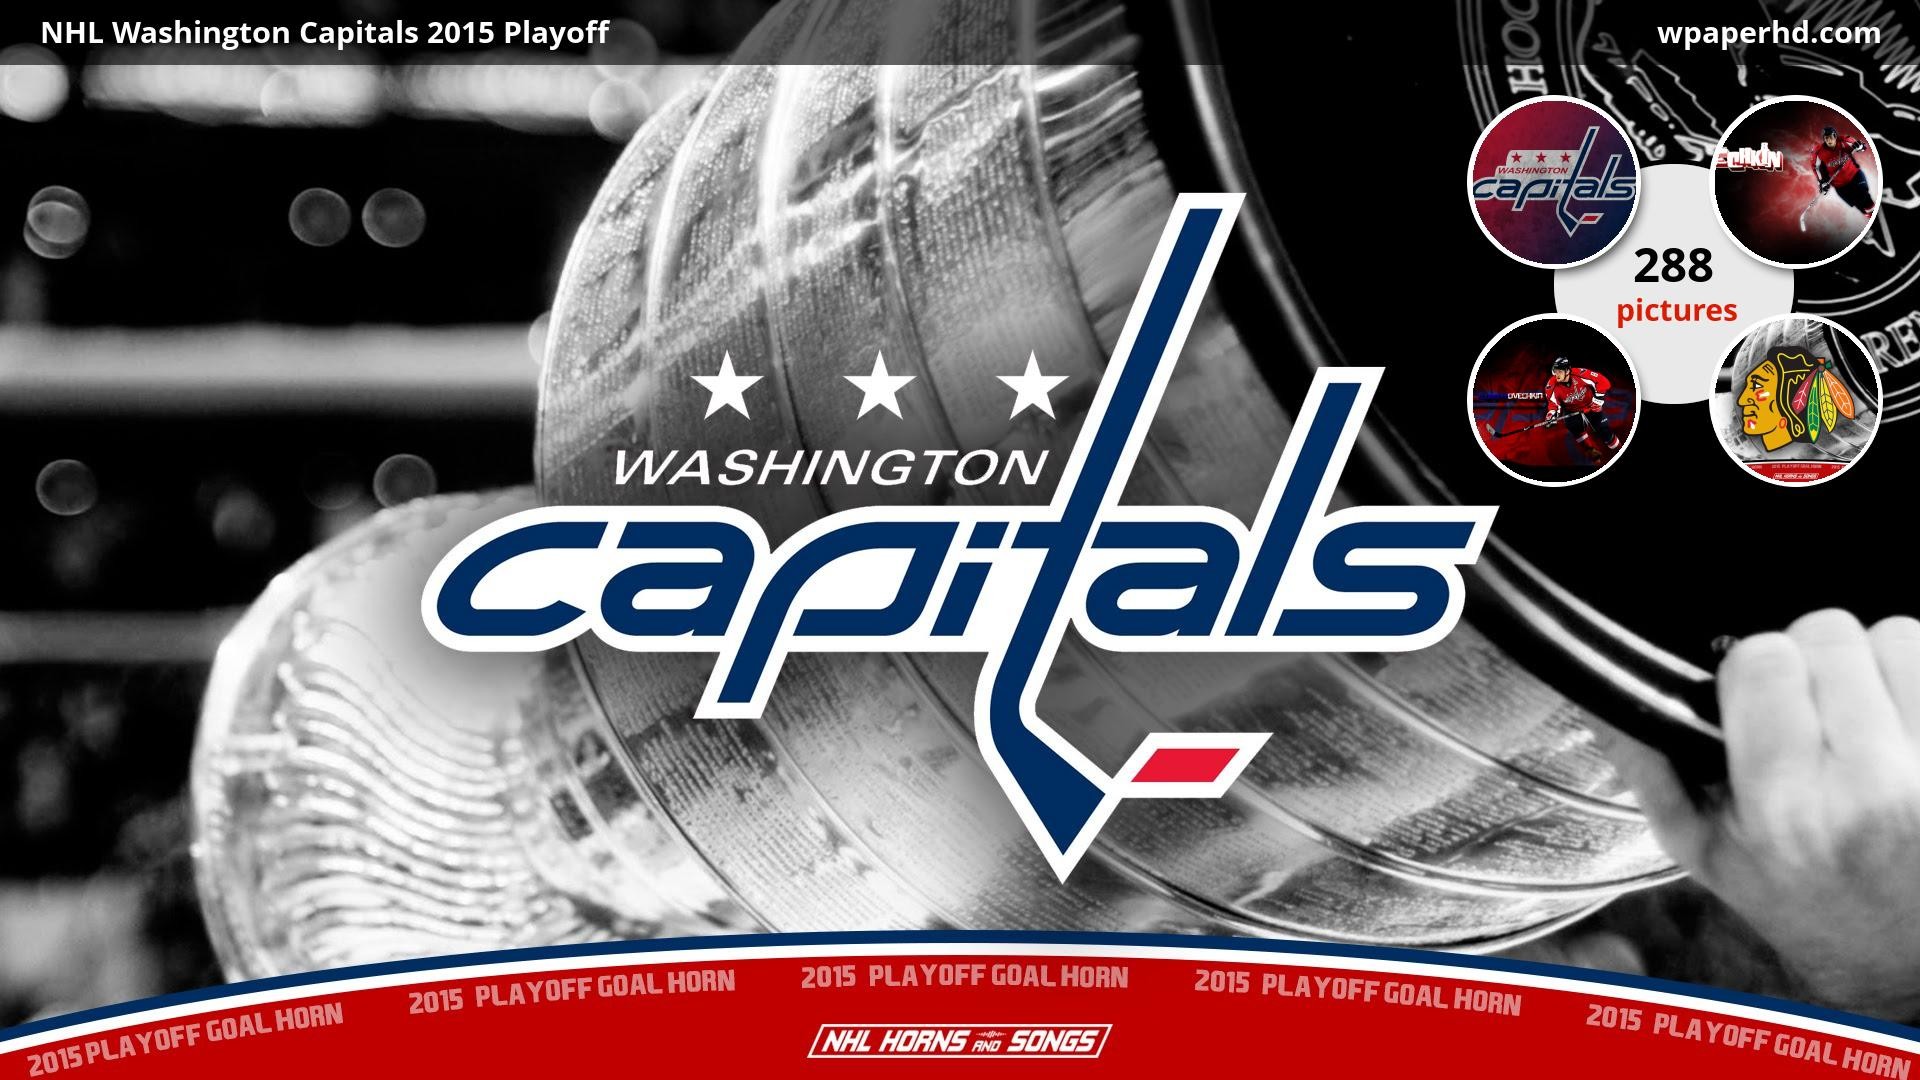 1920x1080 ... Washington Capitals 2015 Playoff wallpaper, where you can download this  picture in Original size and ...